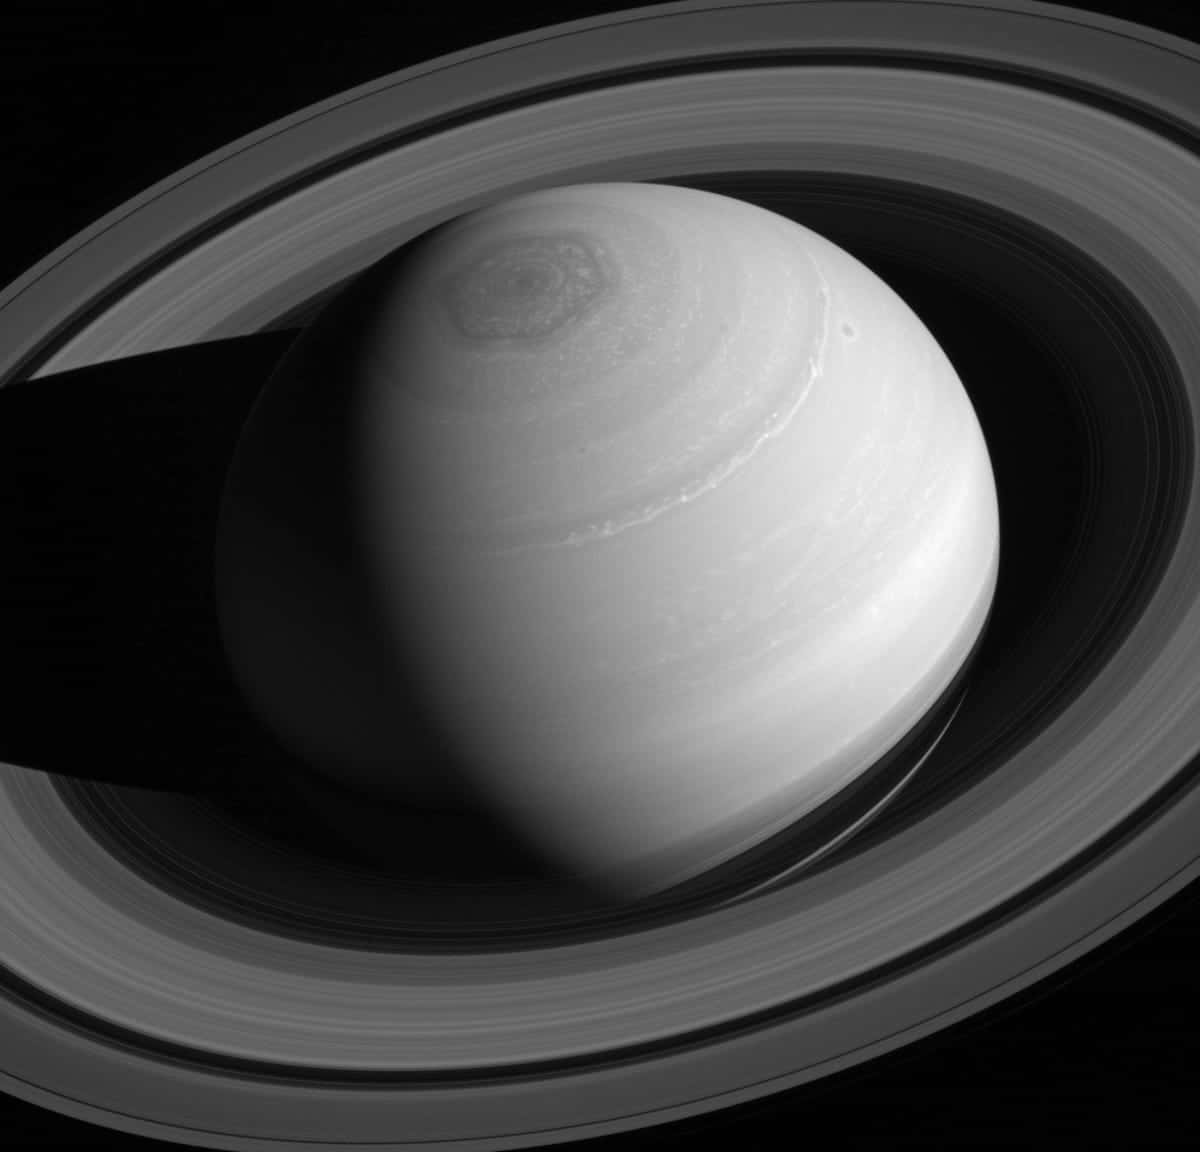 The majestic beauty of Saturn